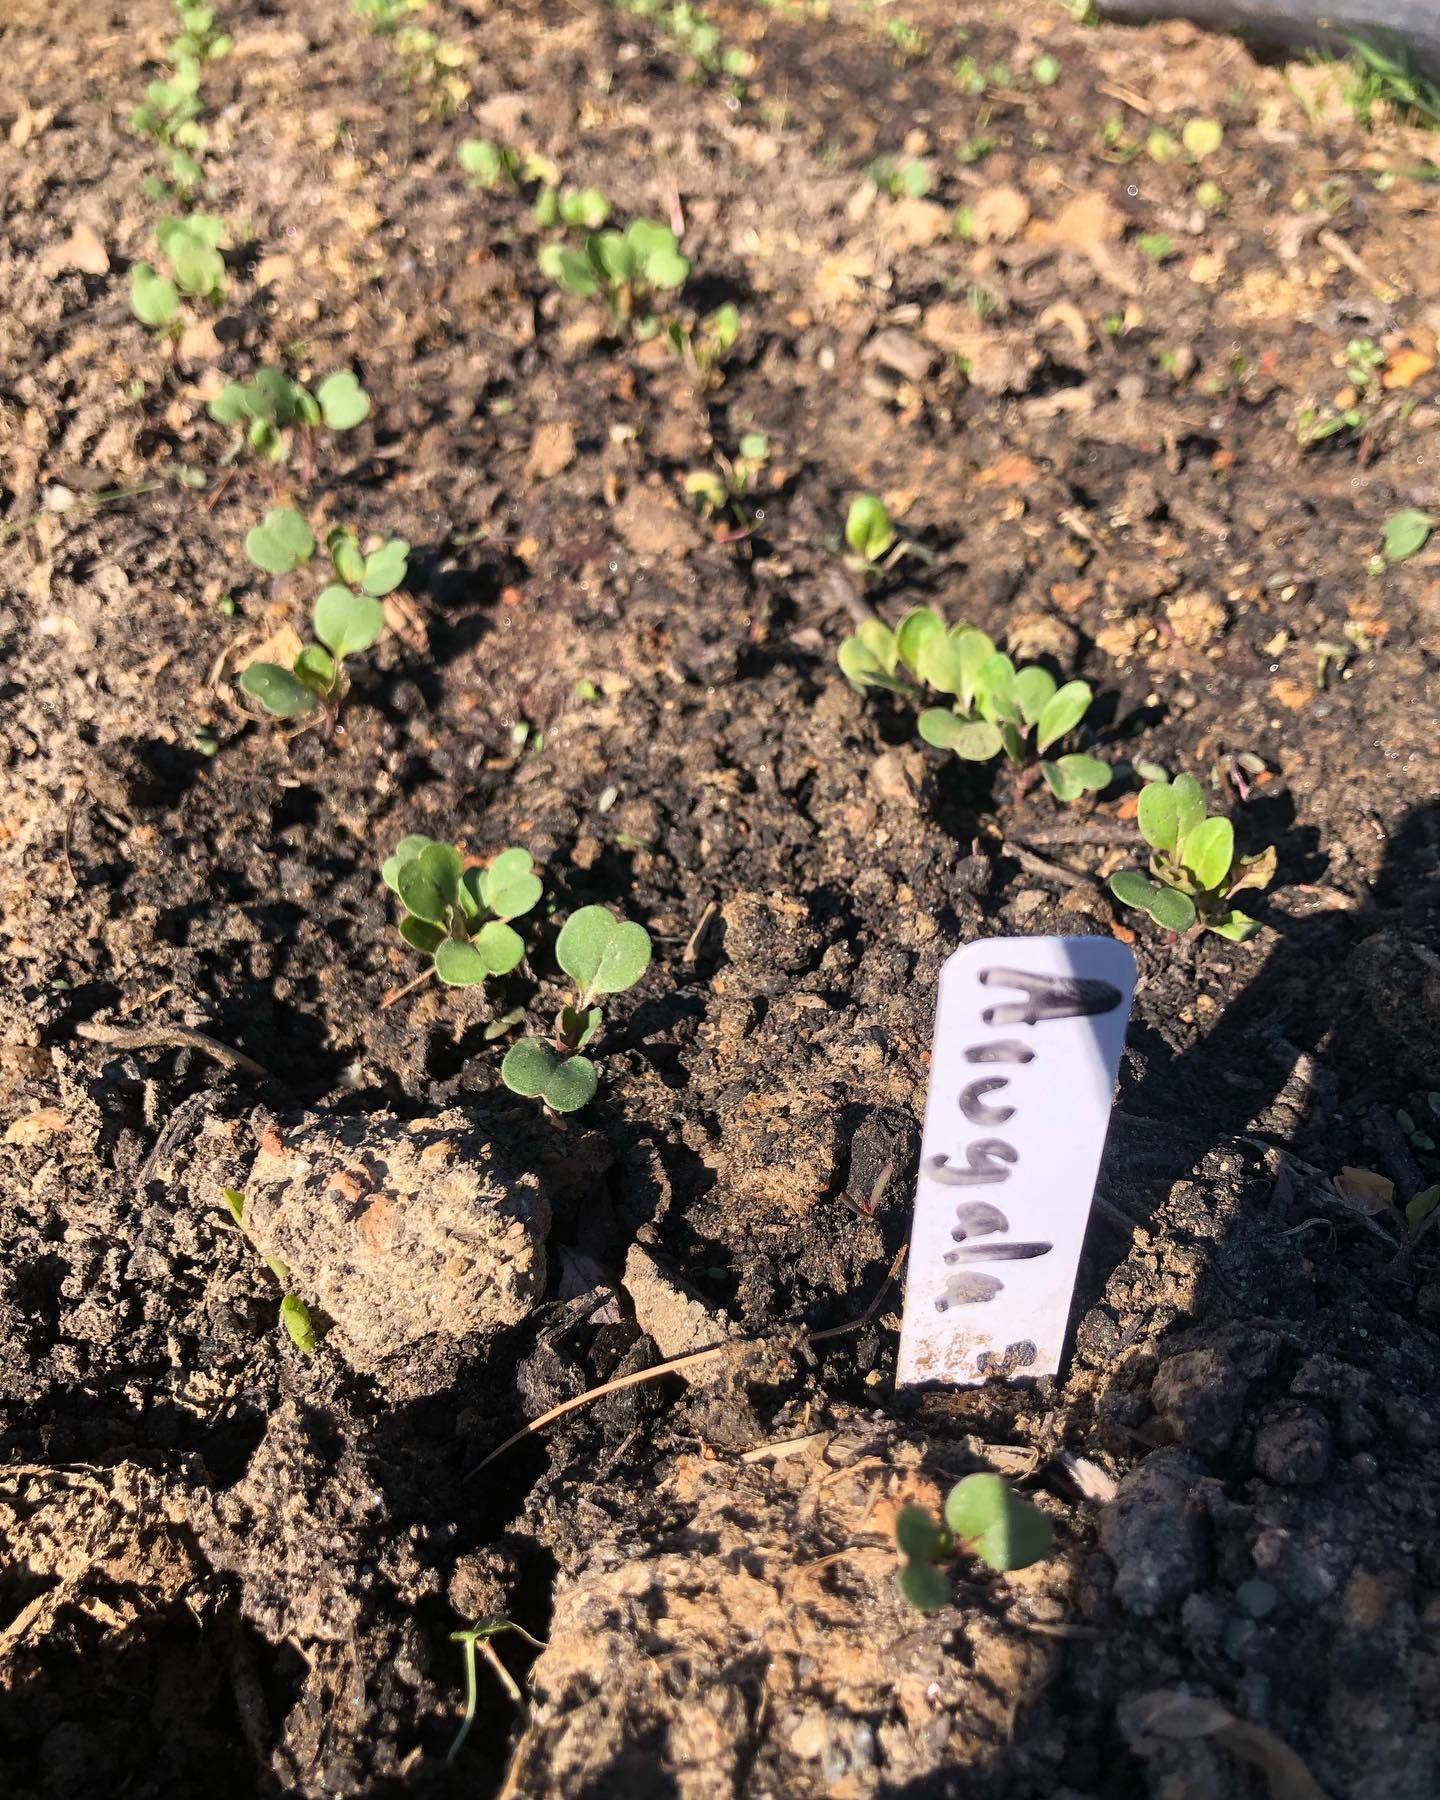 Farmer version of March madness - 12 seeds of Arugula pull off the upset against 5 days of Frost!! Also- potting up peppers and tomatoes, constantly monitoring temps for frost protection, catching the first asparagus poke up, planting fruit trees wit